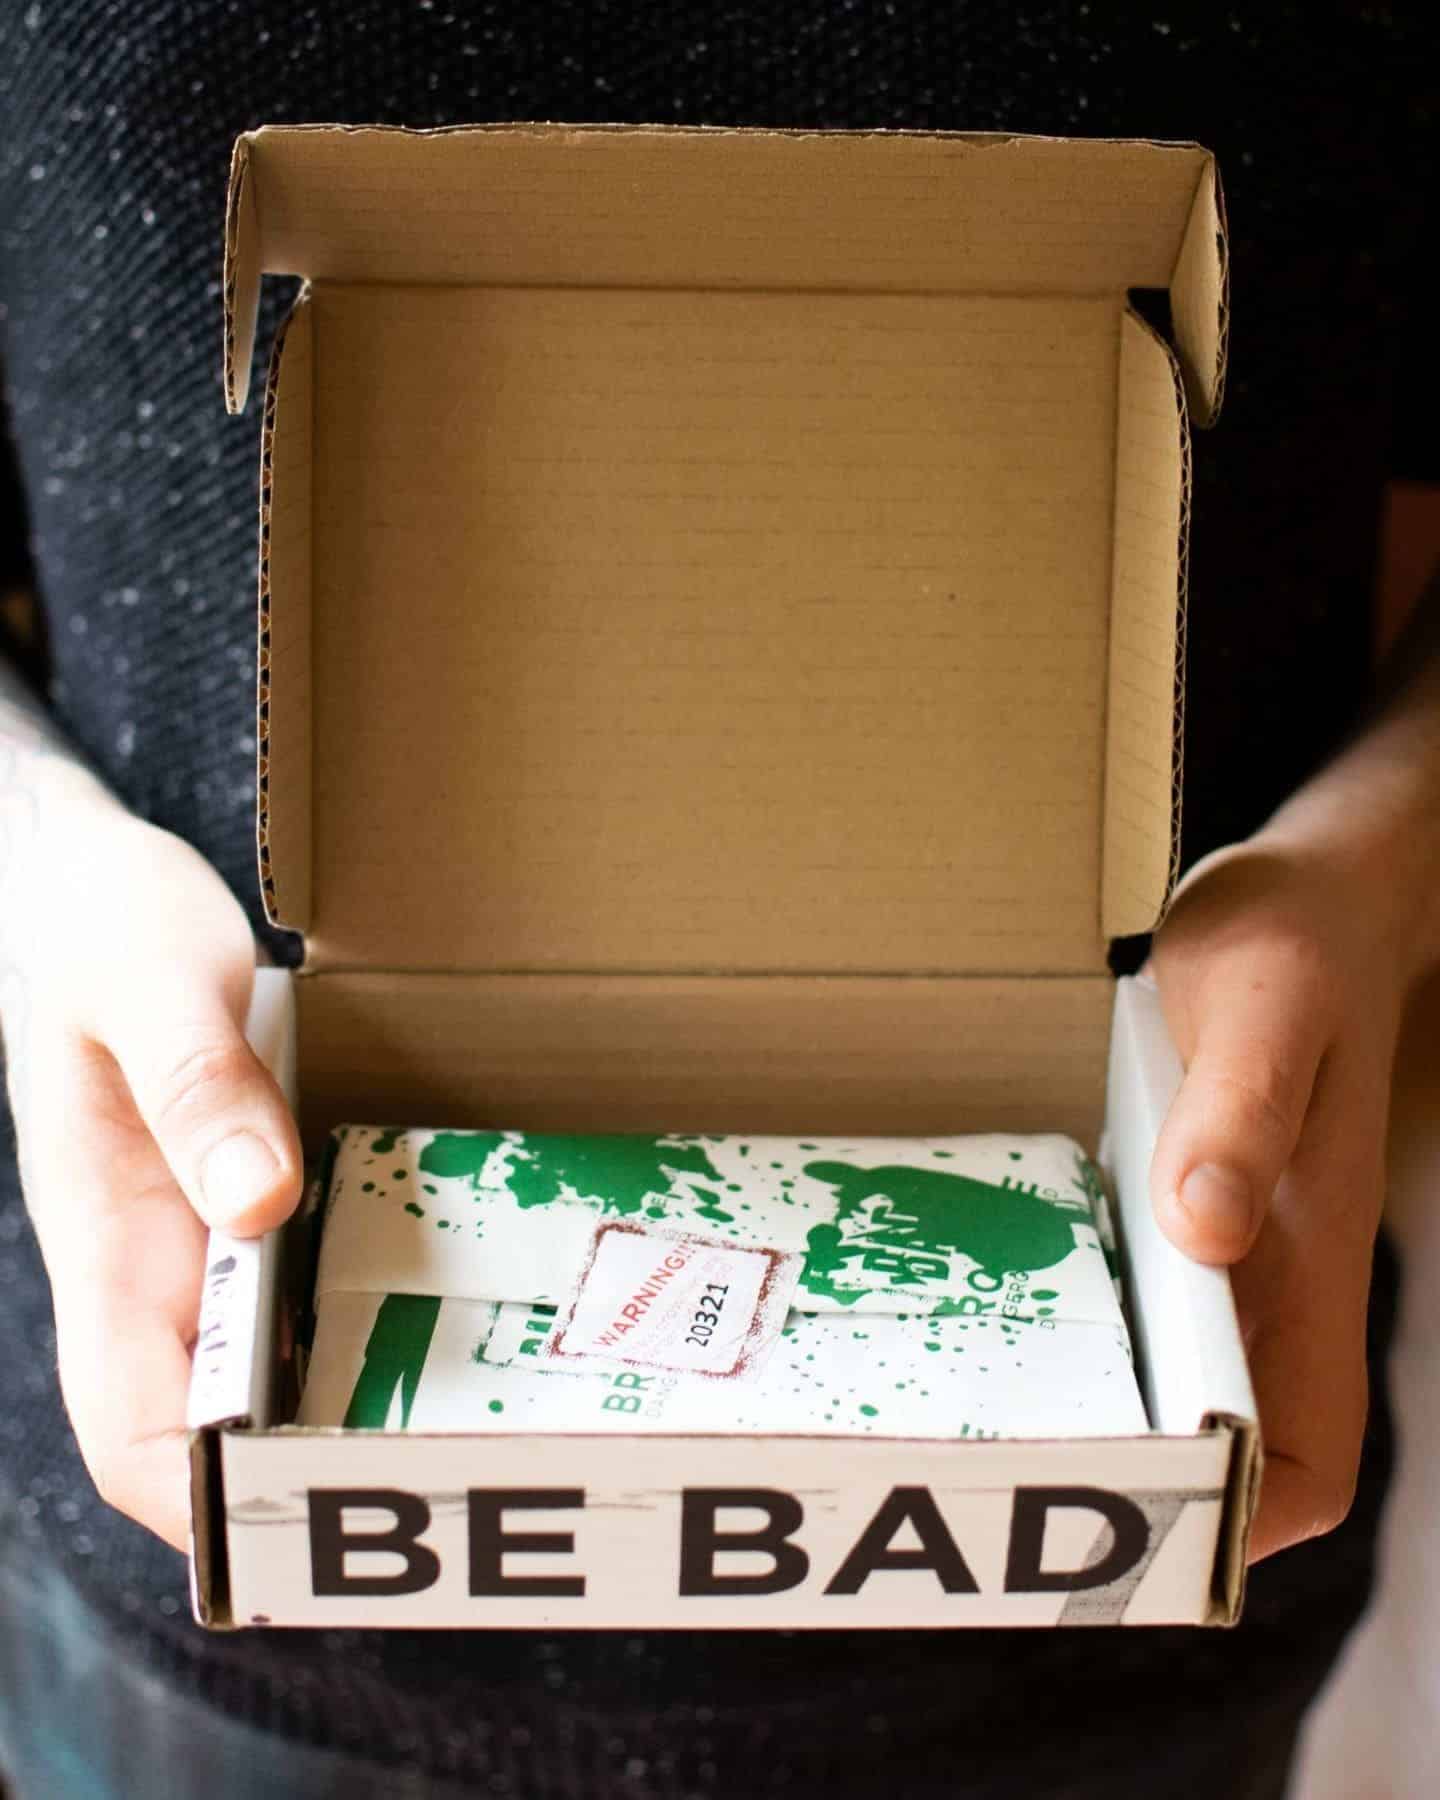 The box has been opened revealing a message "Be Bad". Inside is some green paint splattered paper wrapped around the brownies.